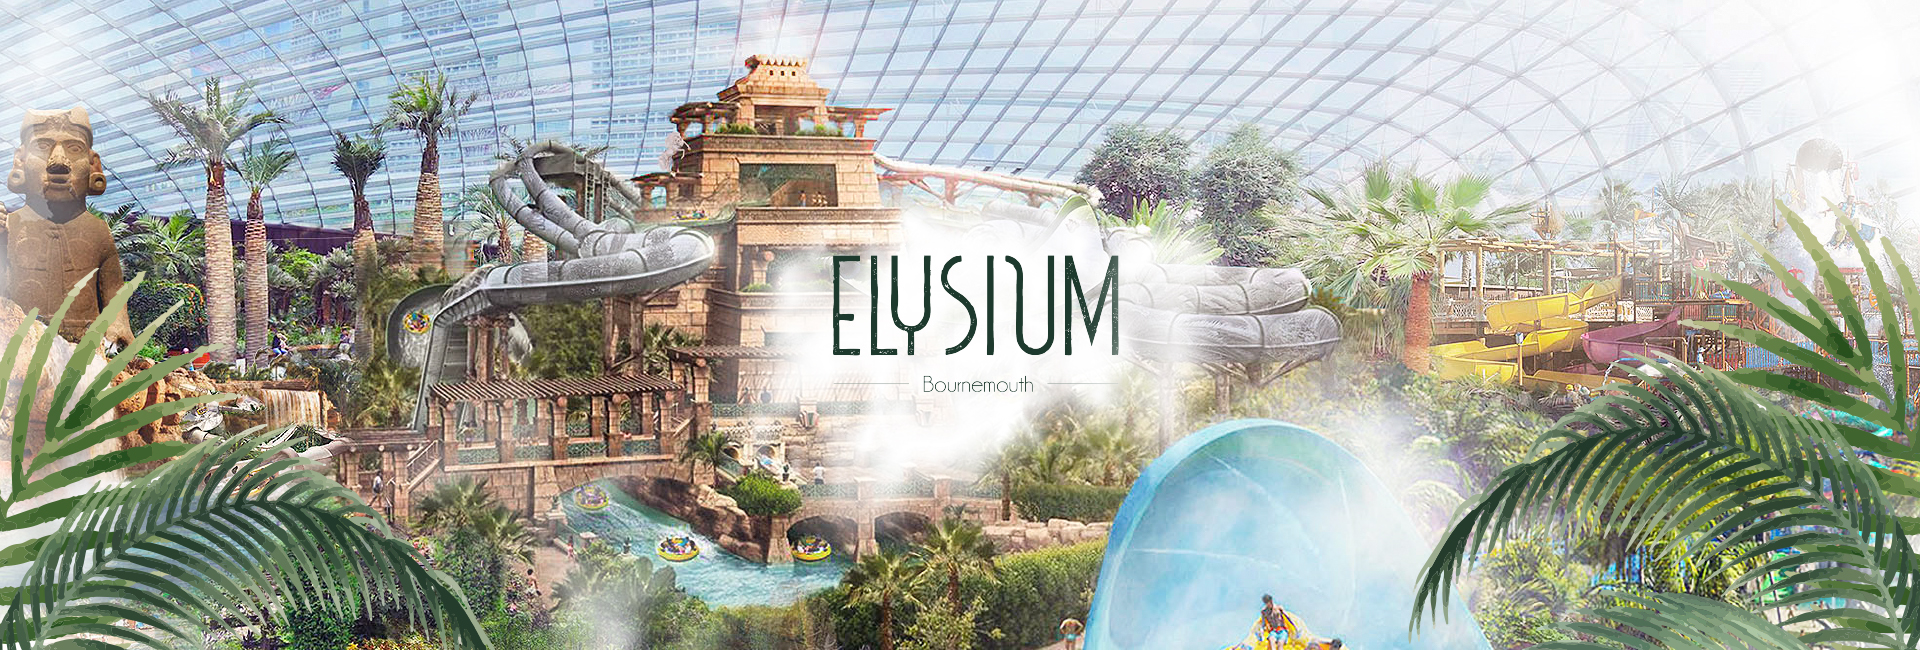 Digital Storm design and launch website for £75 million waterpark that could be opening in Bournemouth in 2023.